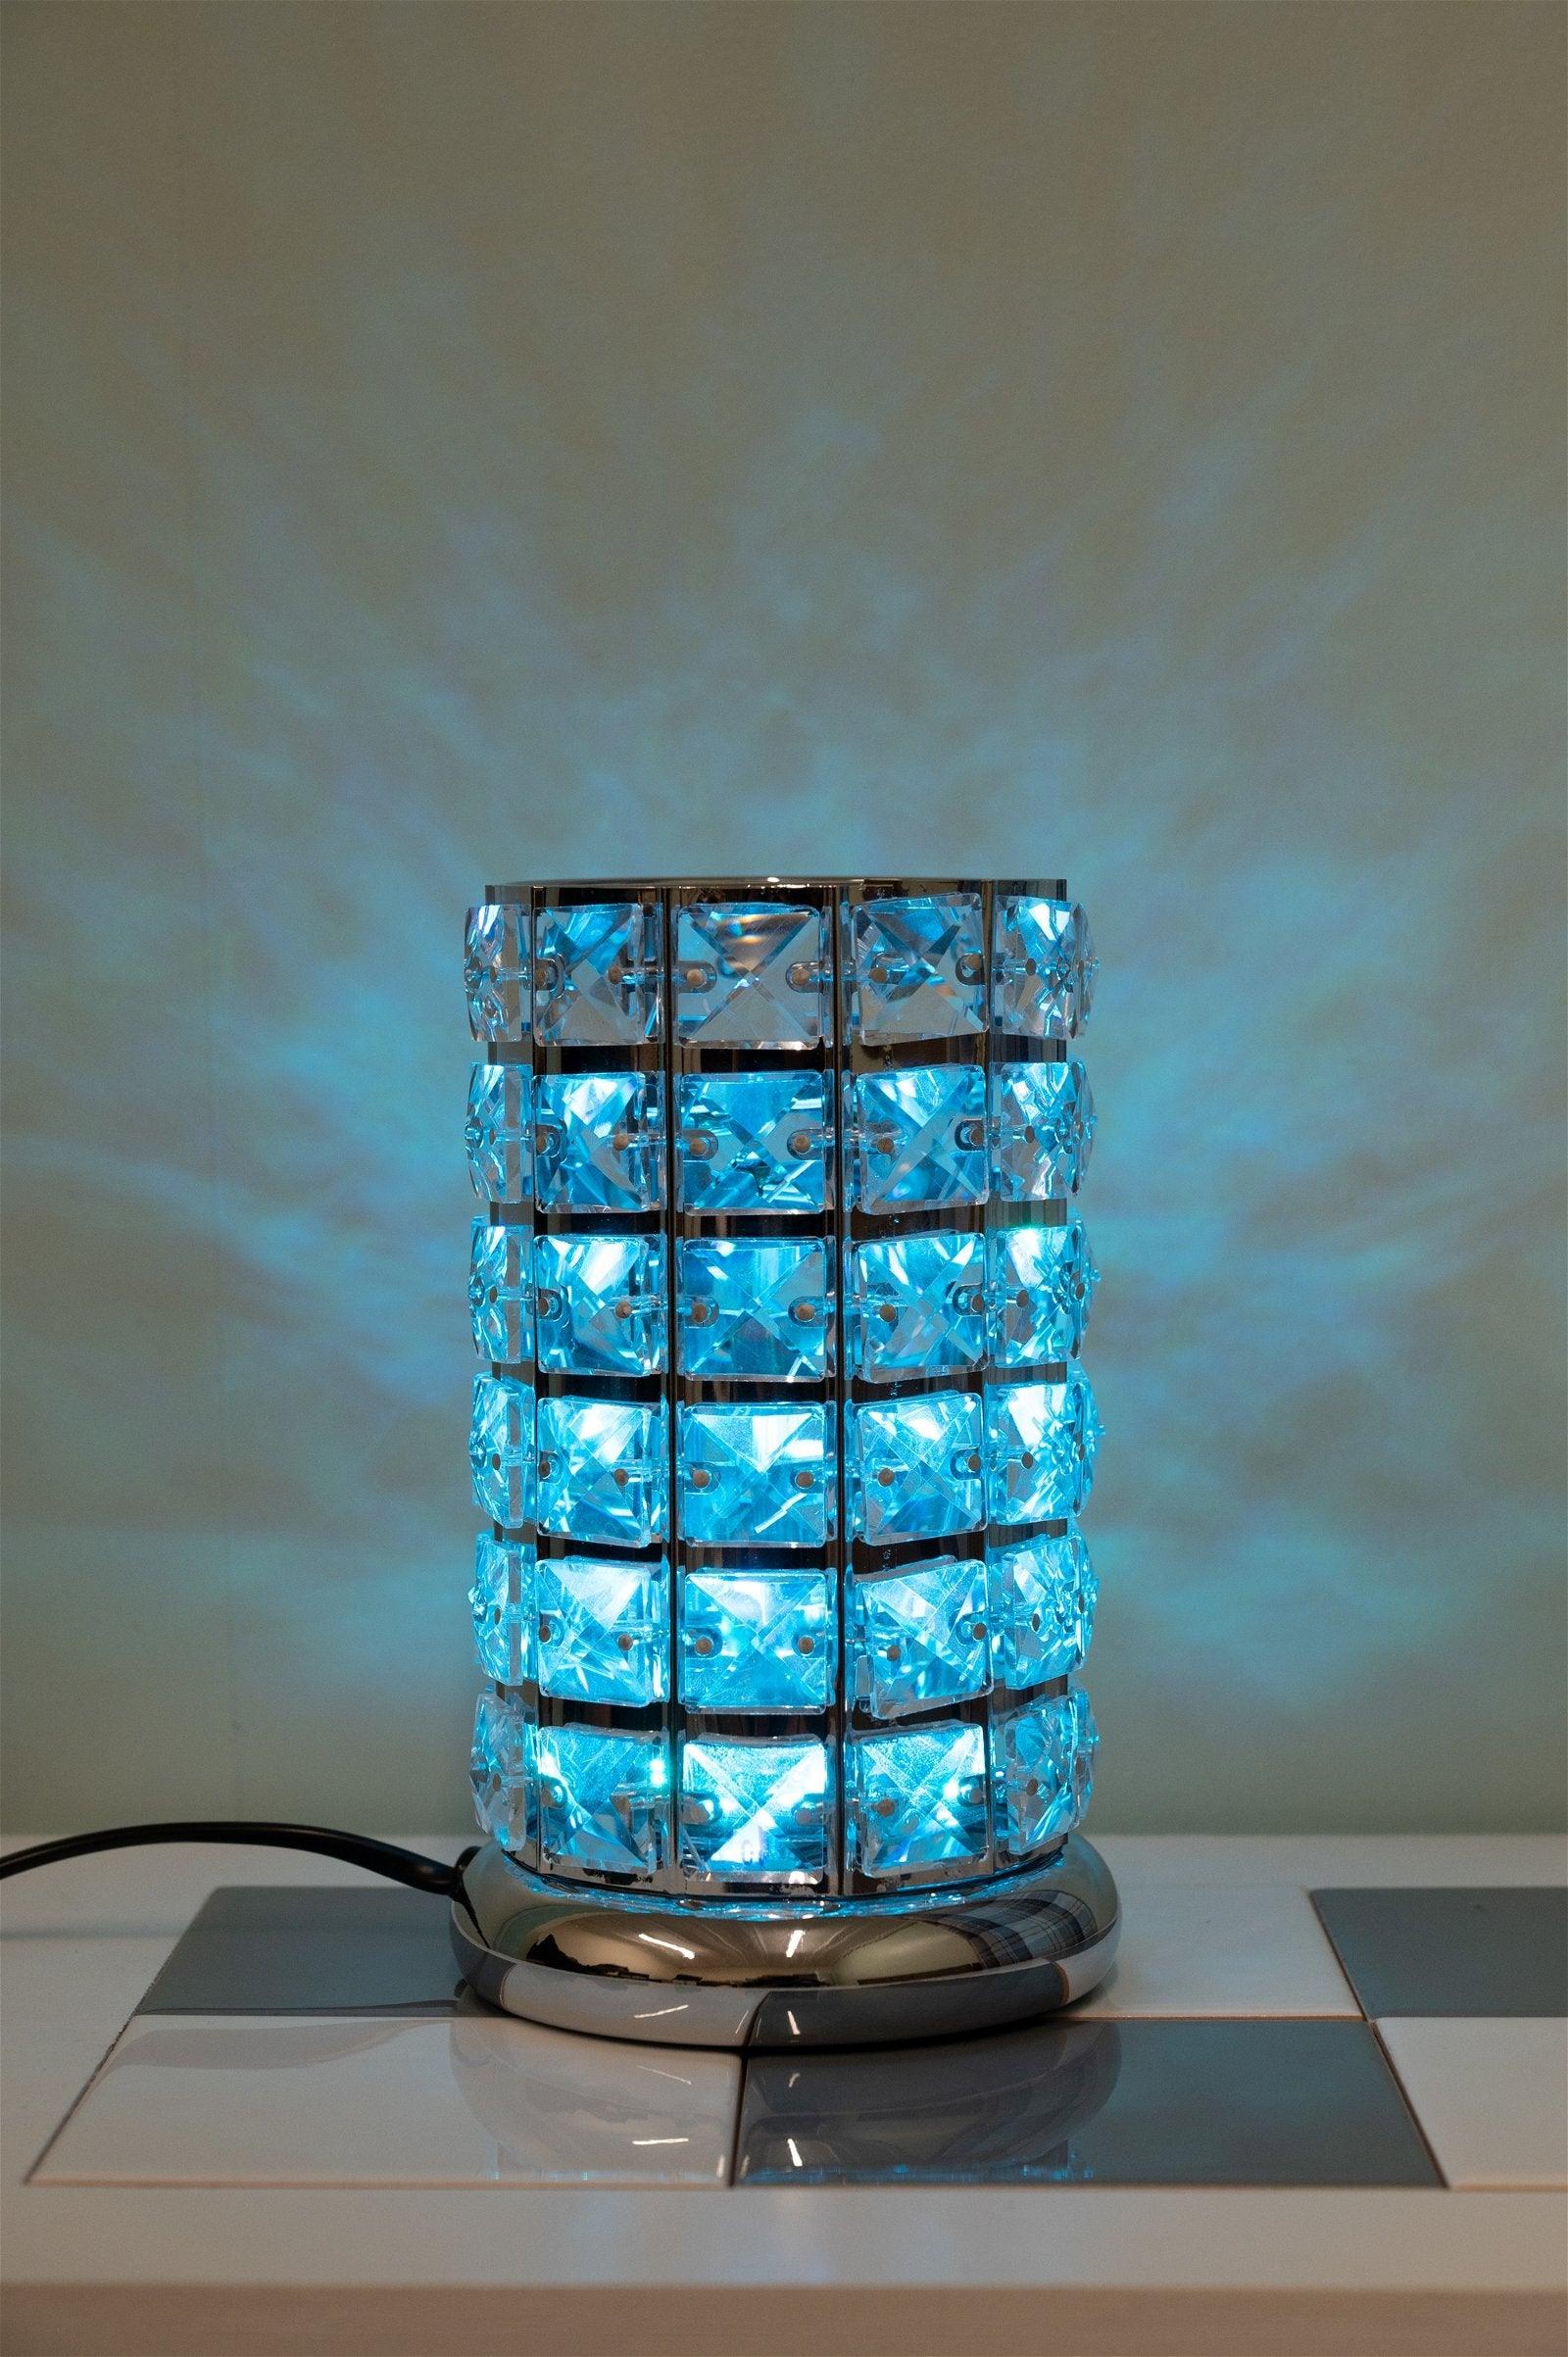 Crystal LED Oil Burner - £56.99 - Lamps With Aroma Diffusers 